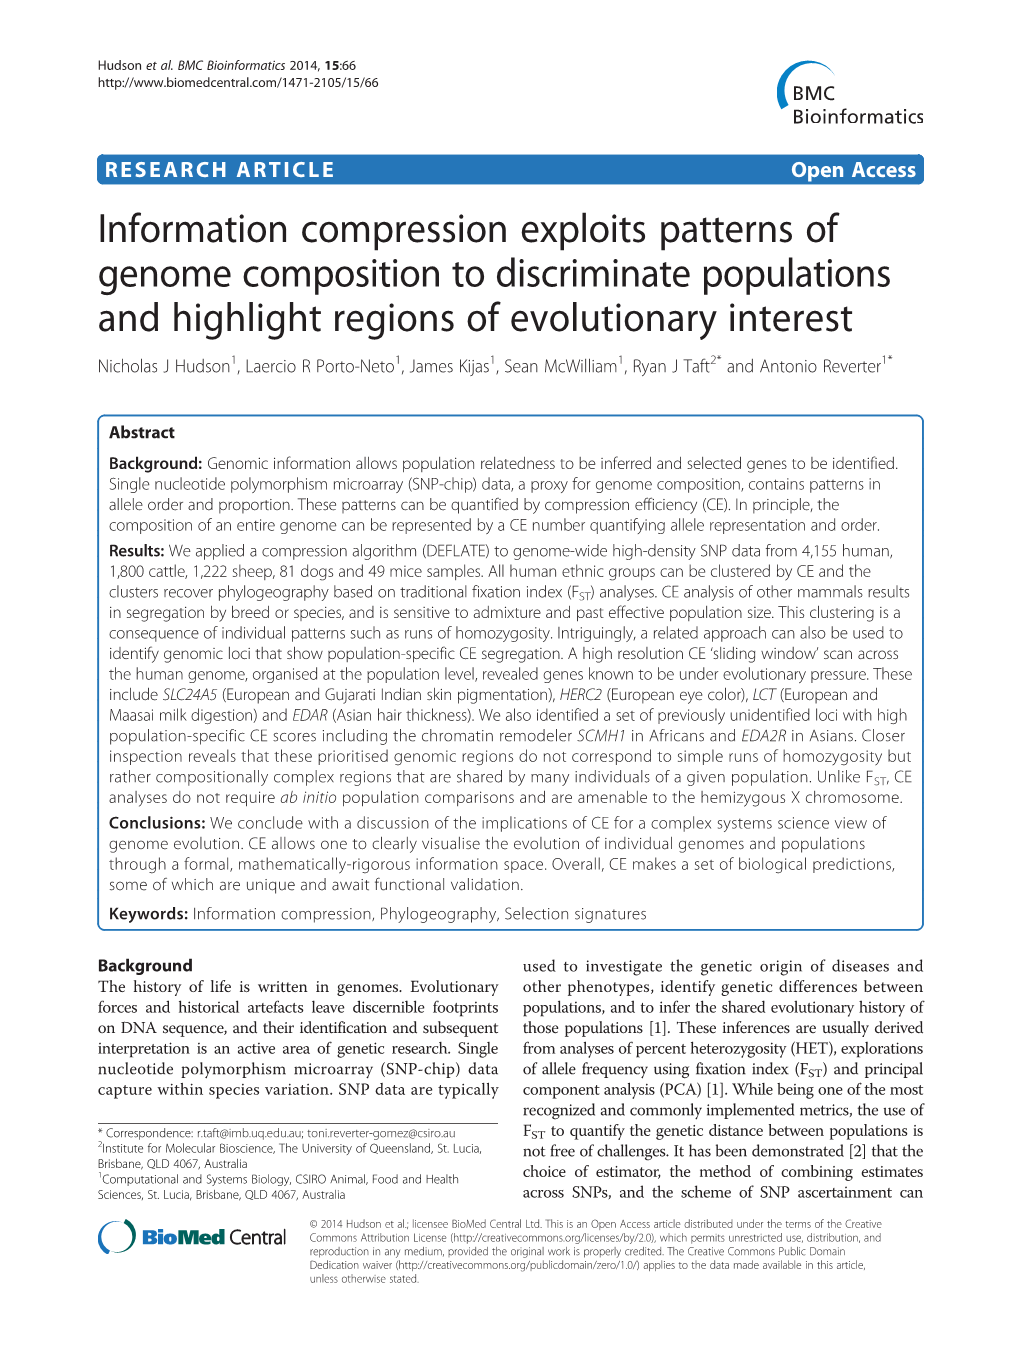 Information Compression Exploits Patterns of Genome Composition To